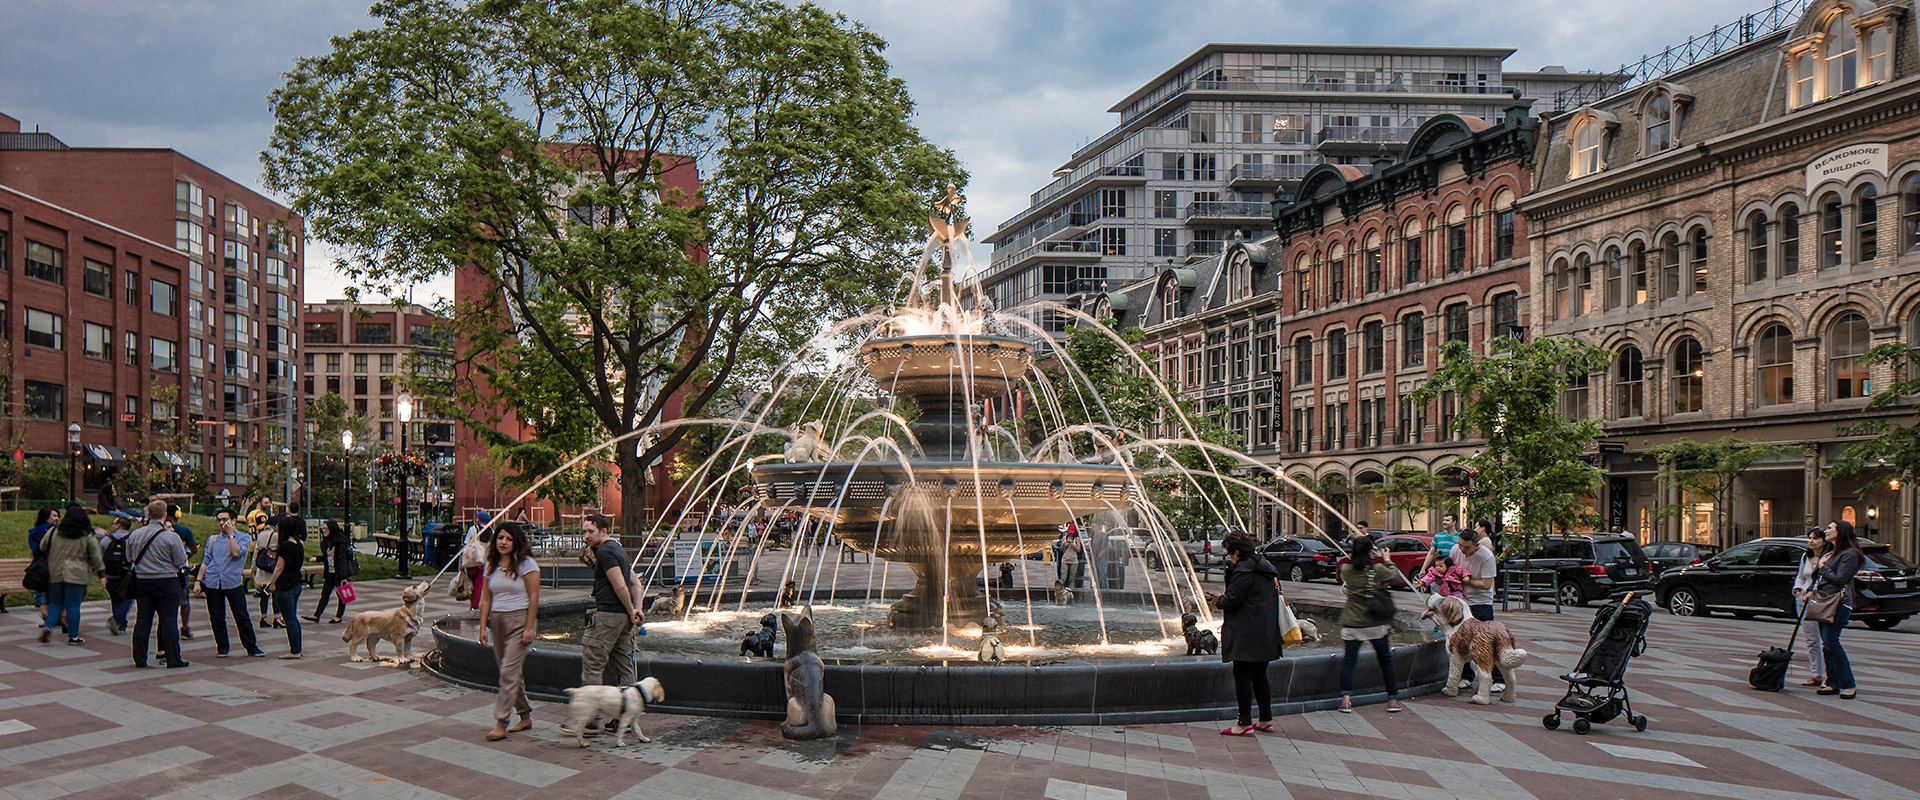 People admiring the granite fountain basin in Berczy Park featuring unique granite colors sourced from Asia and Europe